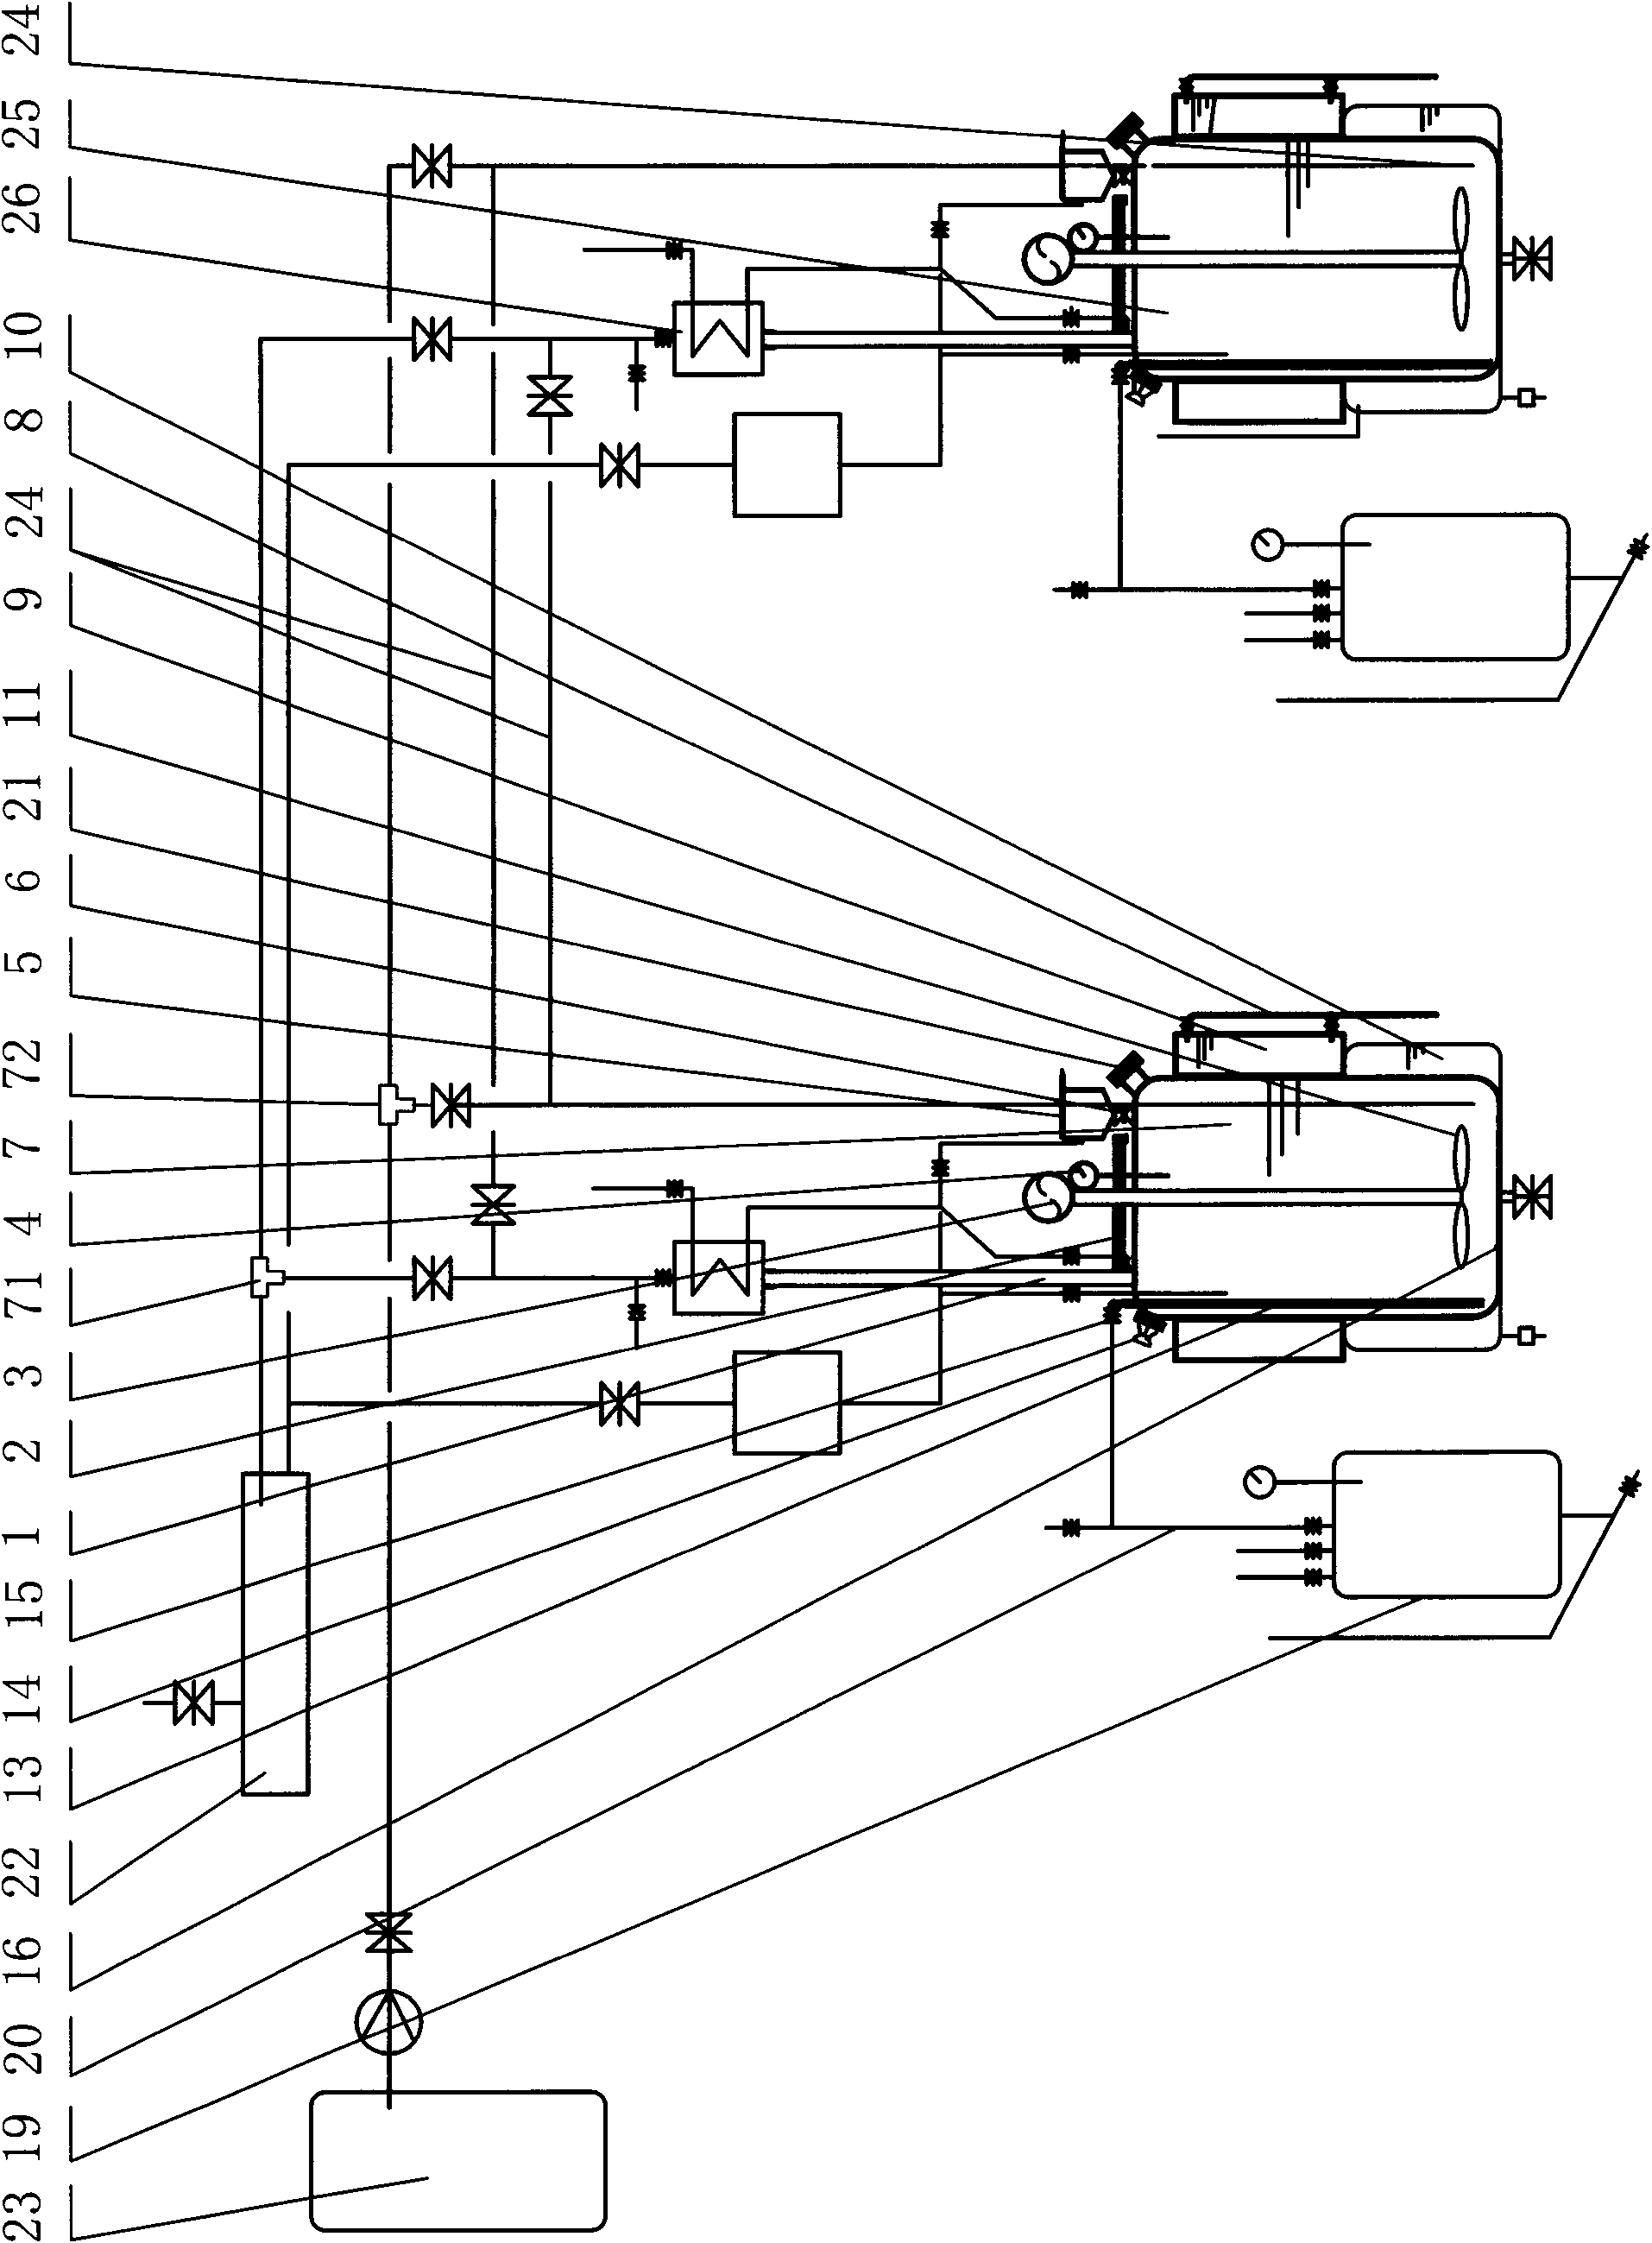 Equipment system for industrially producing Grignard reagent by using gaseous halogenated hydrocarbon